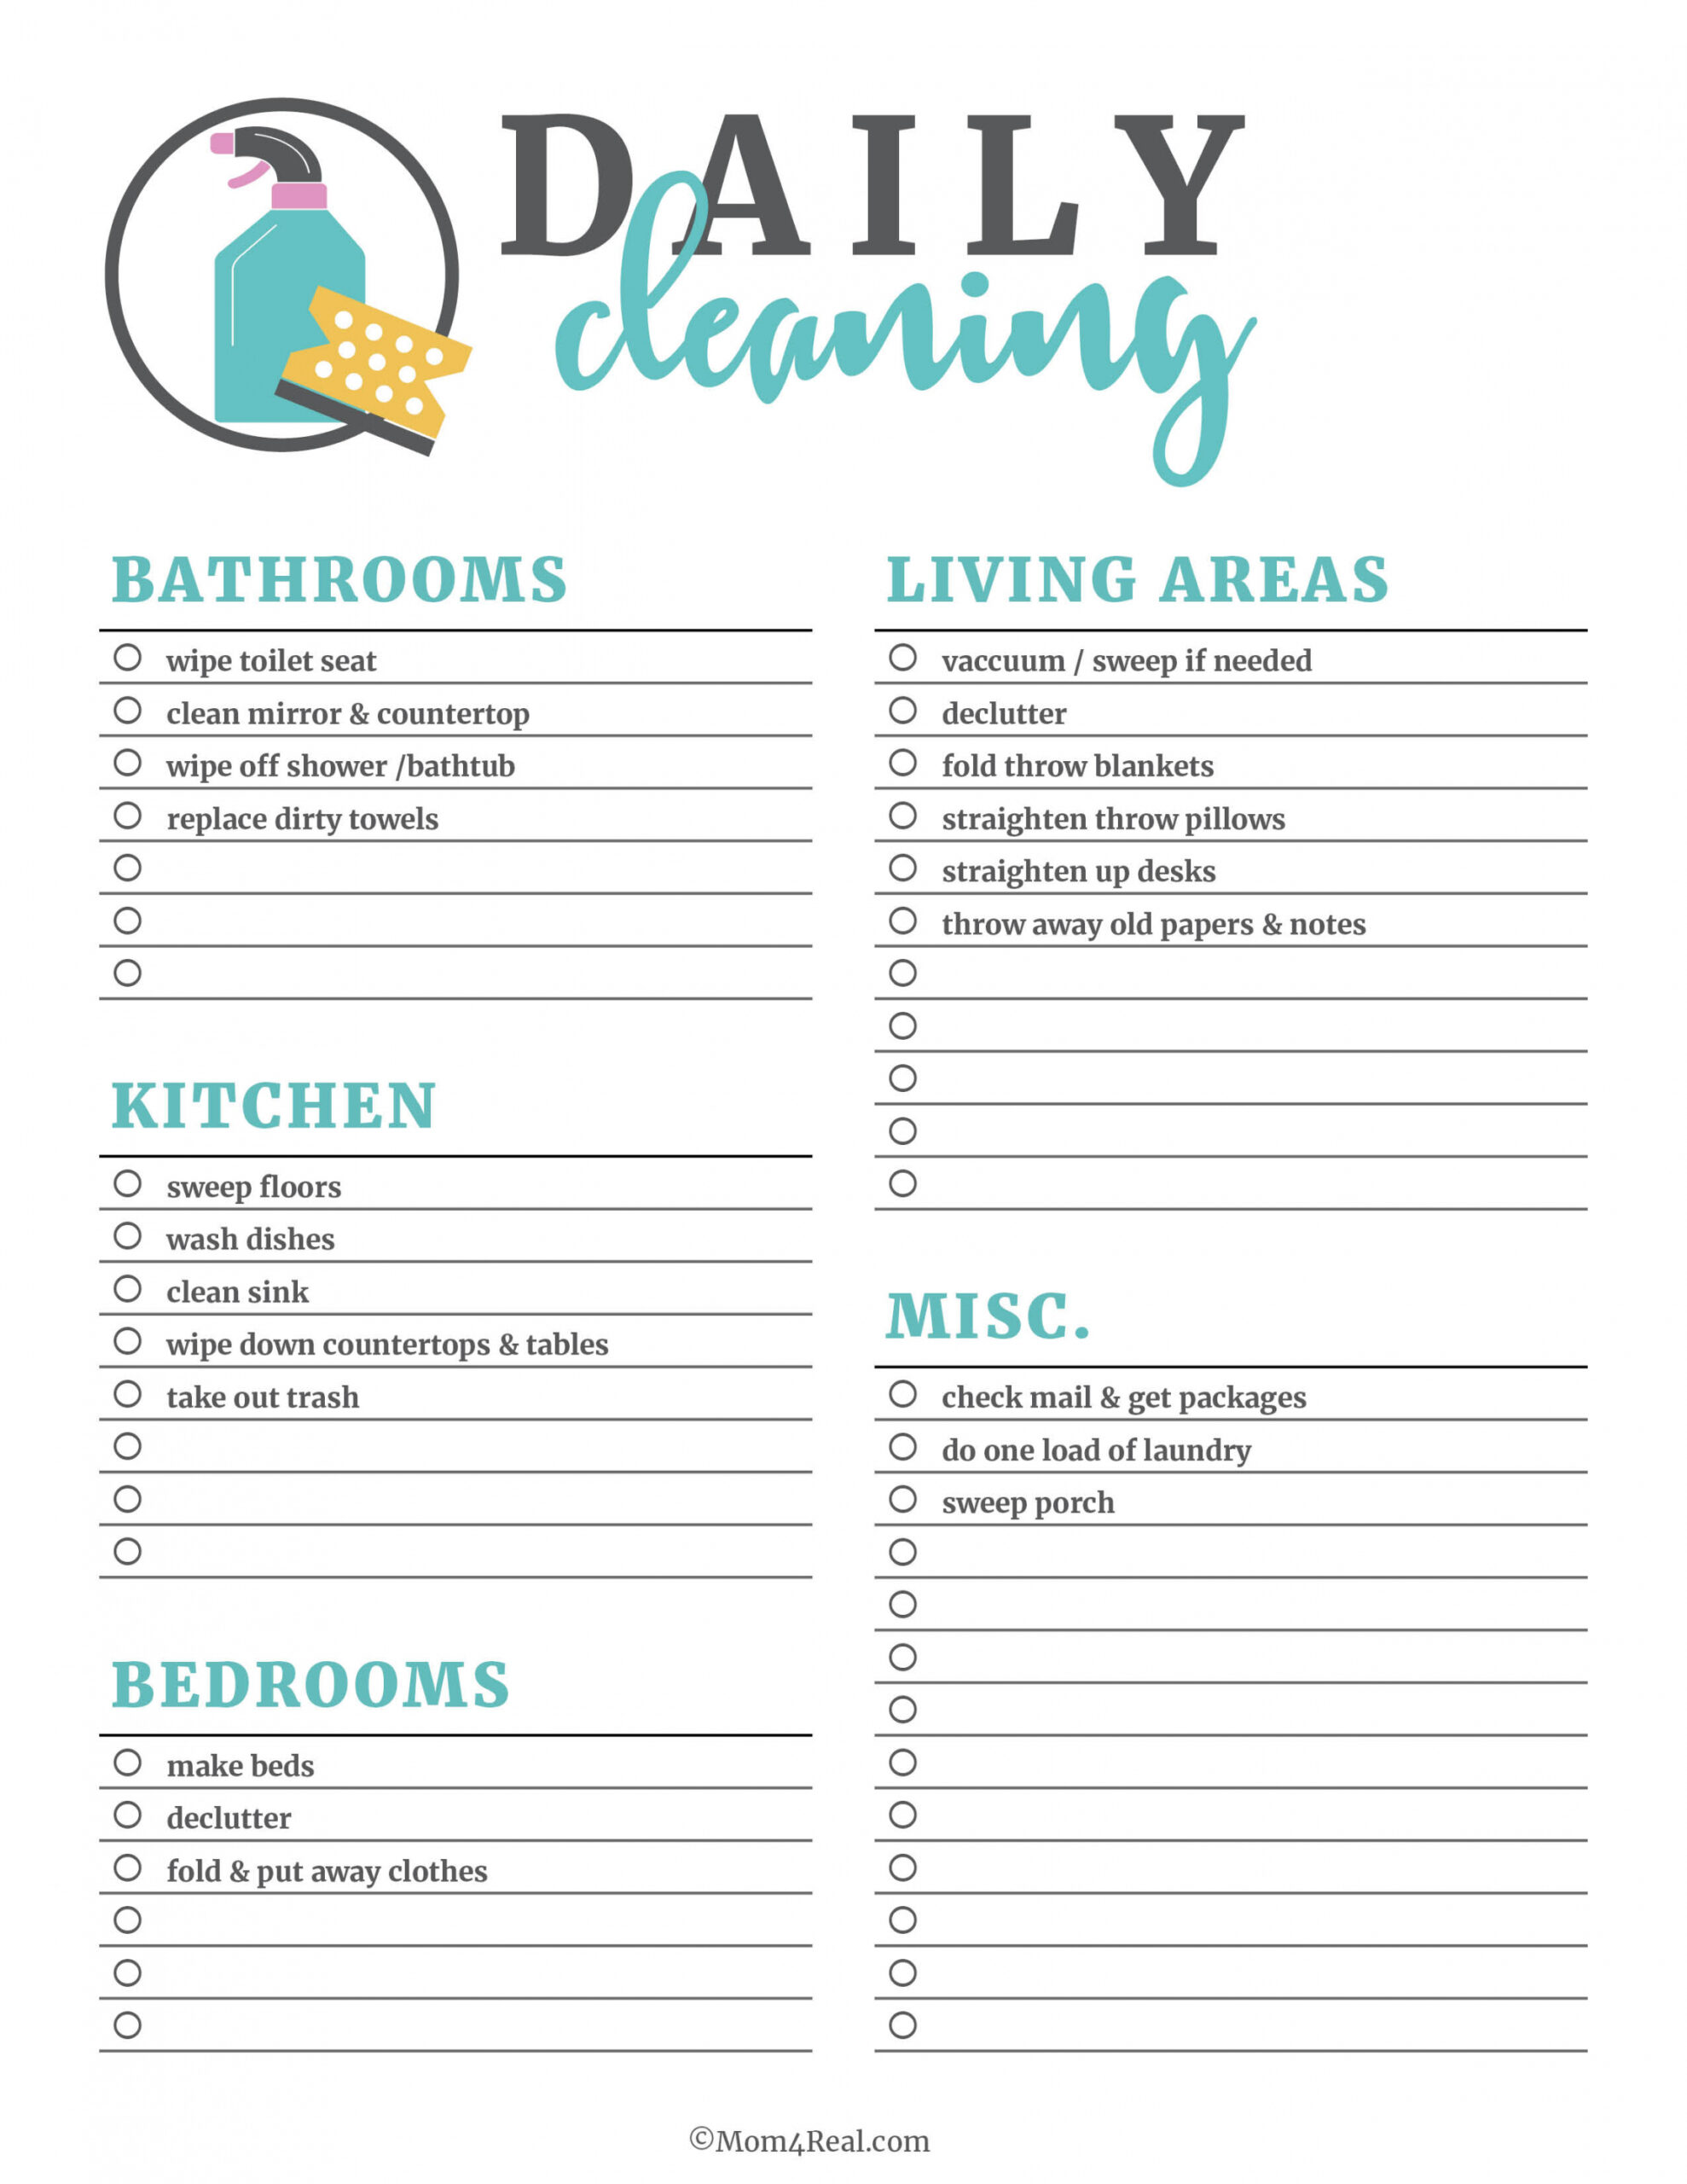 Printable Cleaning Checklists for Daily, Weekly and Monthly Cleaning - FREE Printables - Free Cleaning Schedule Printable